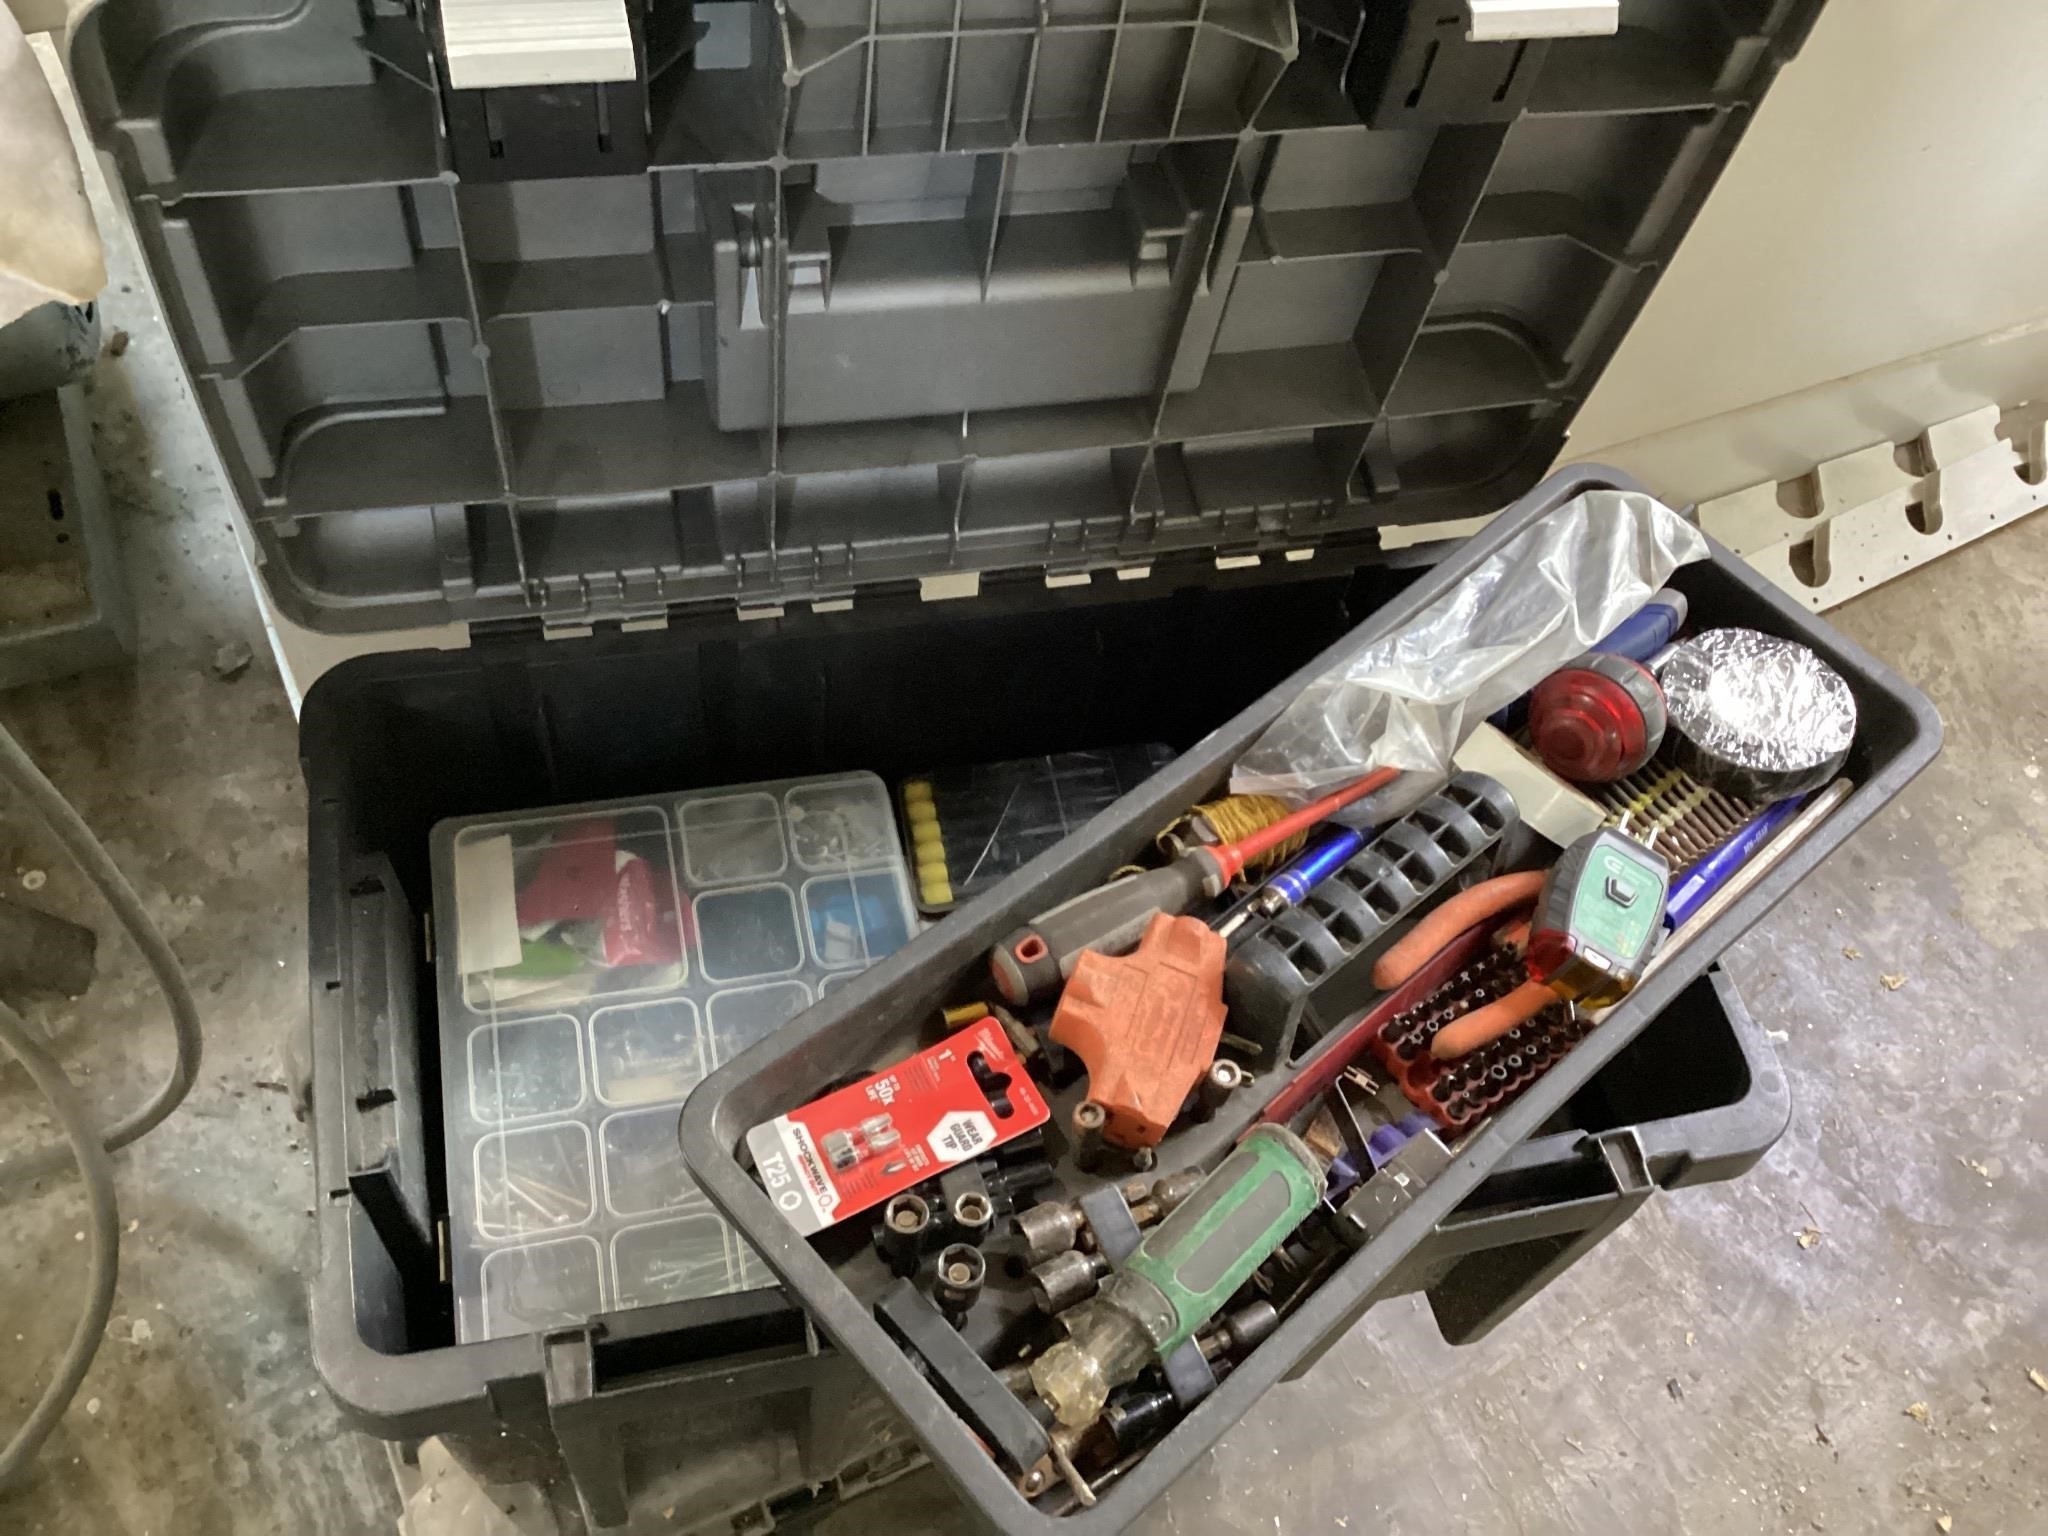 Online Rocky Point Tool Sale, part 1